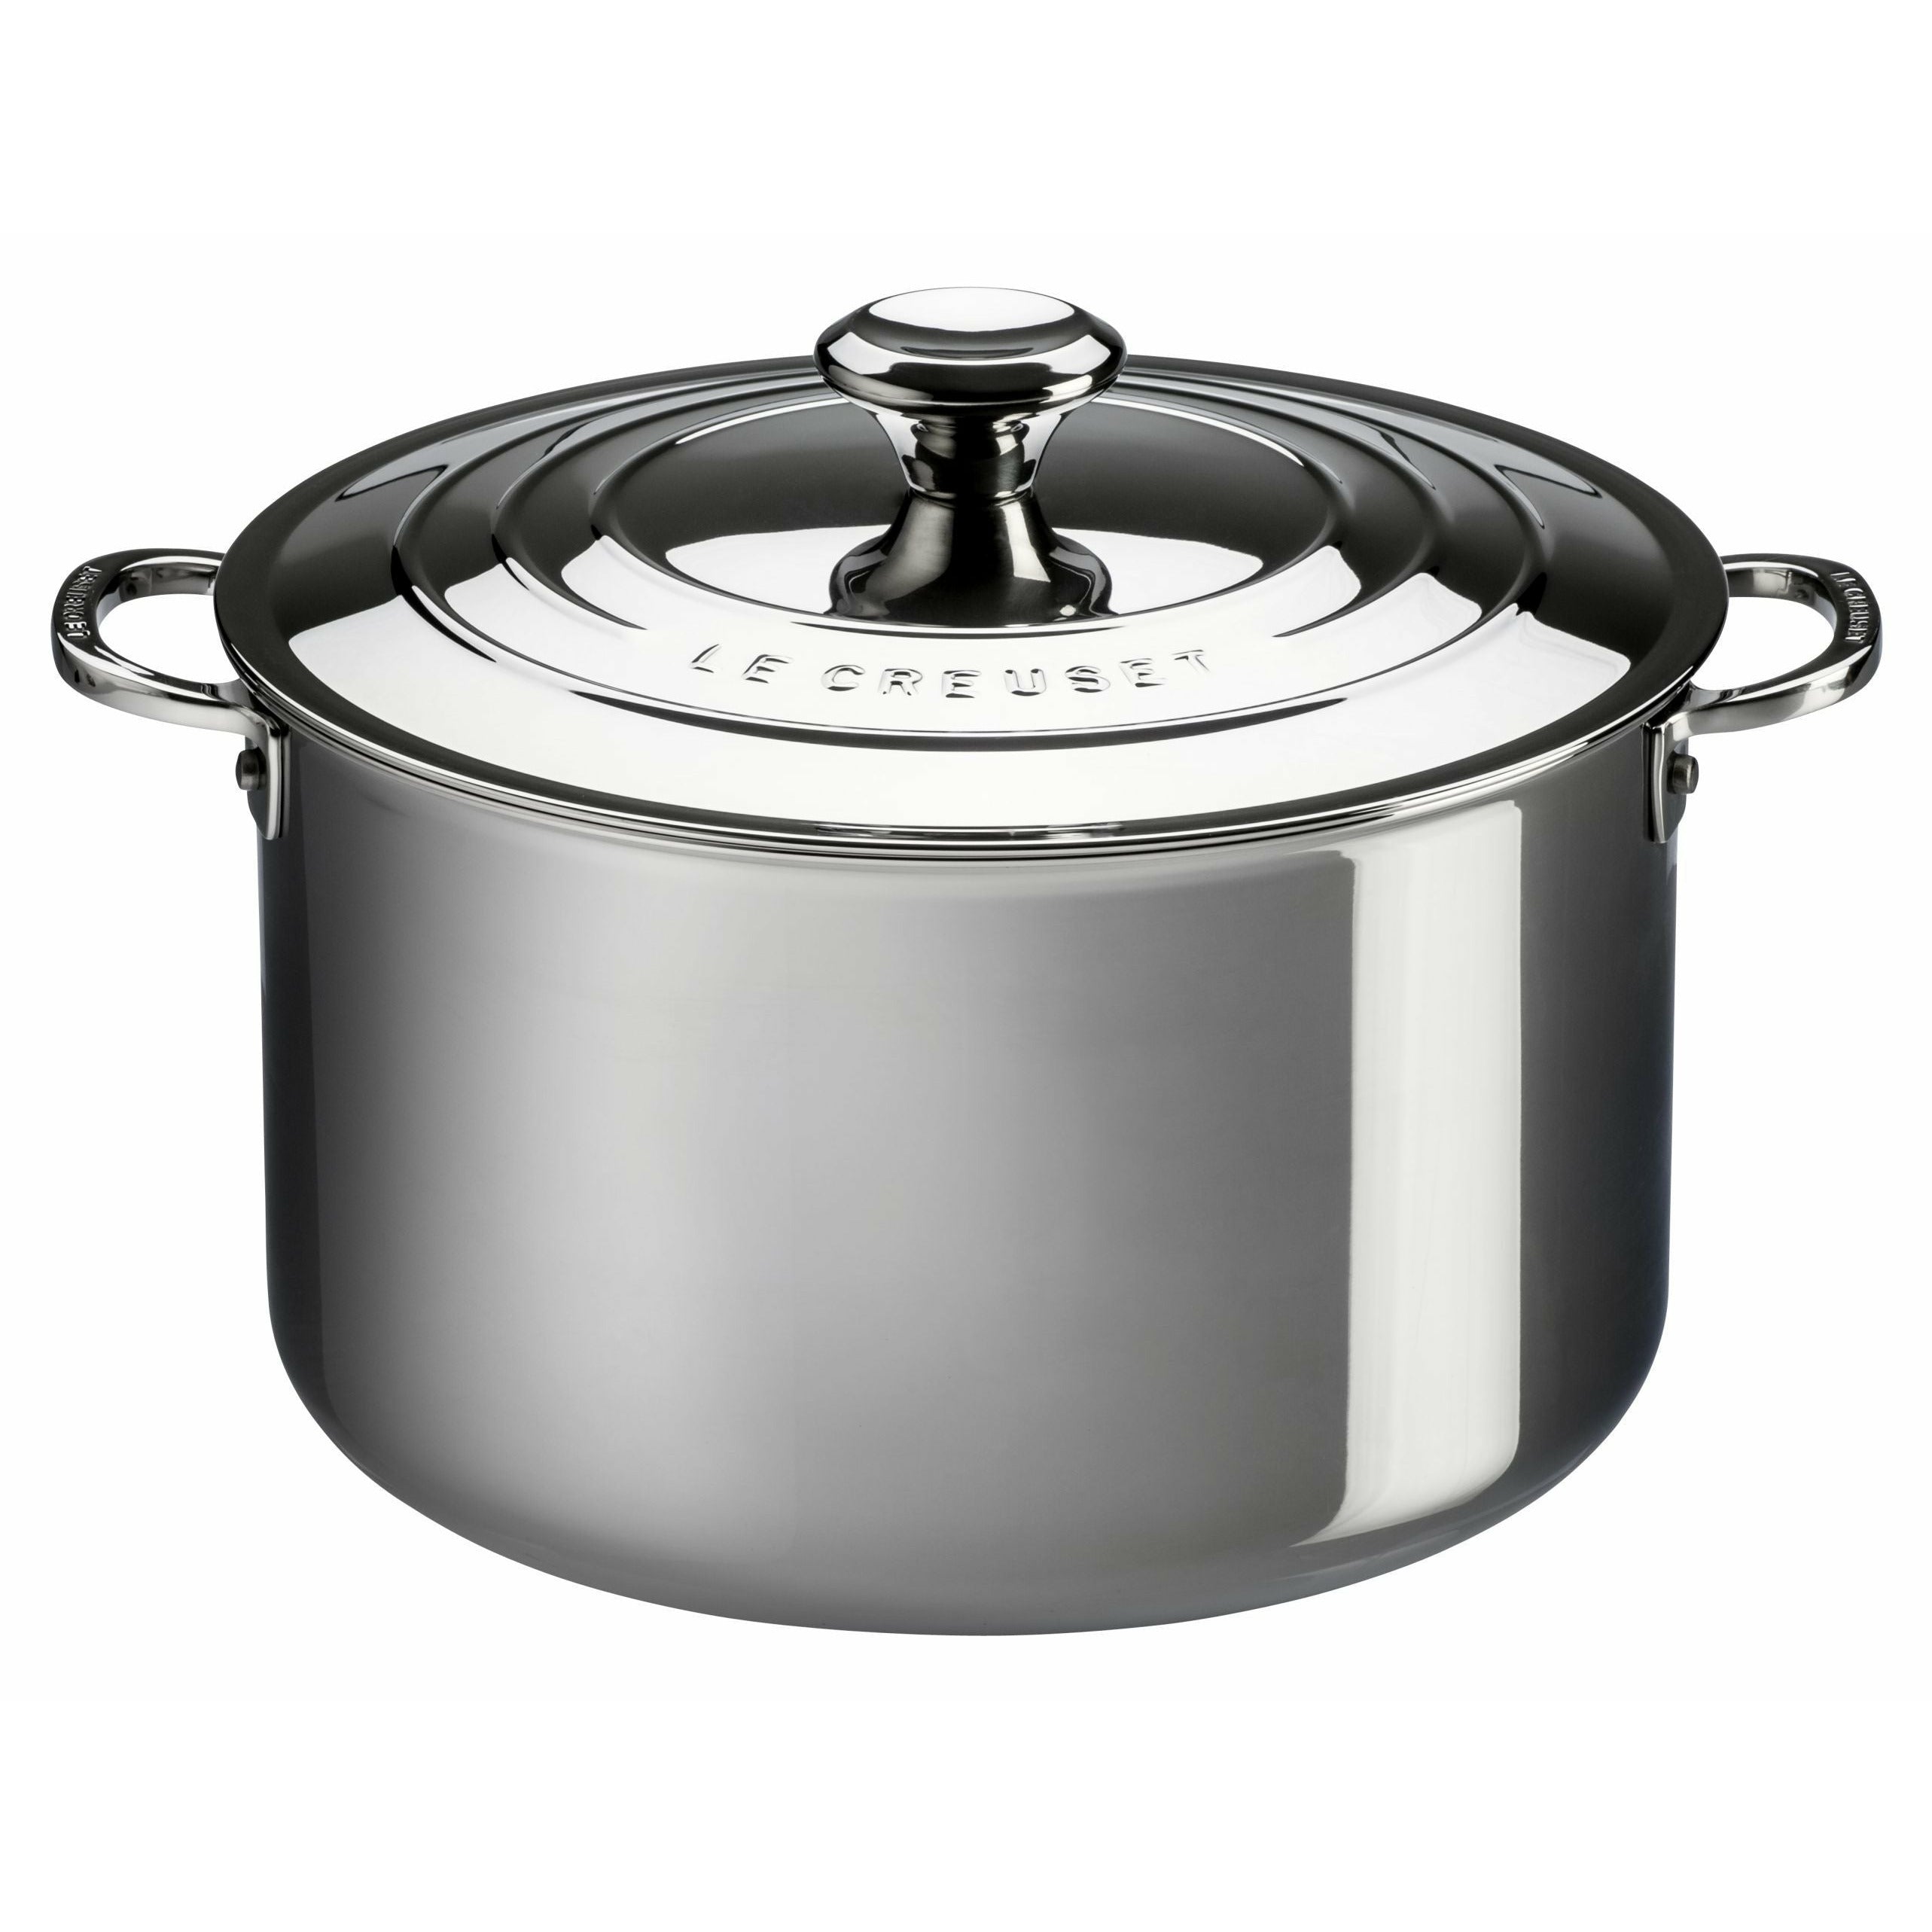 Le Creuset Signature Stainless Steel Stock Pot 6.6 L With Lid